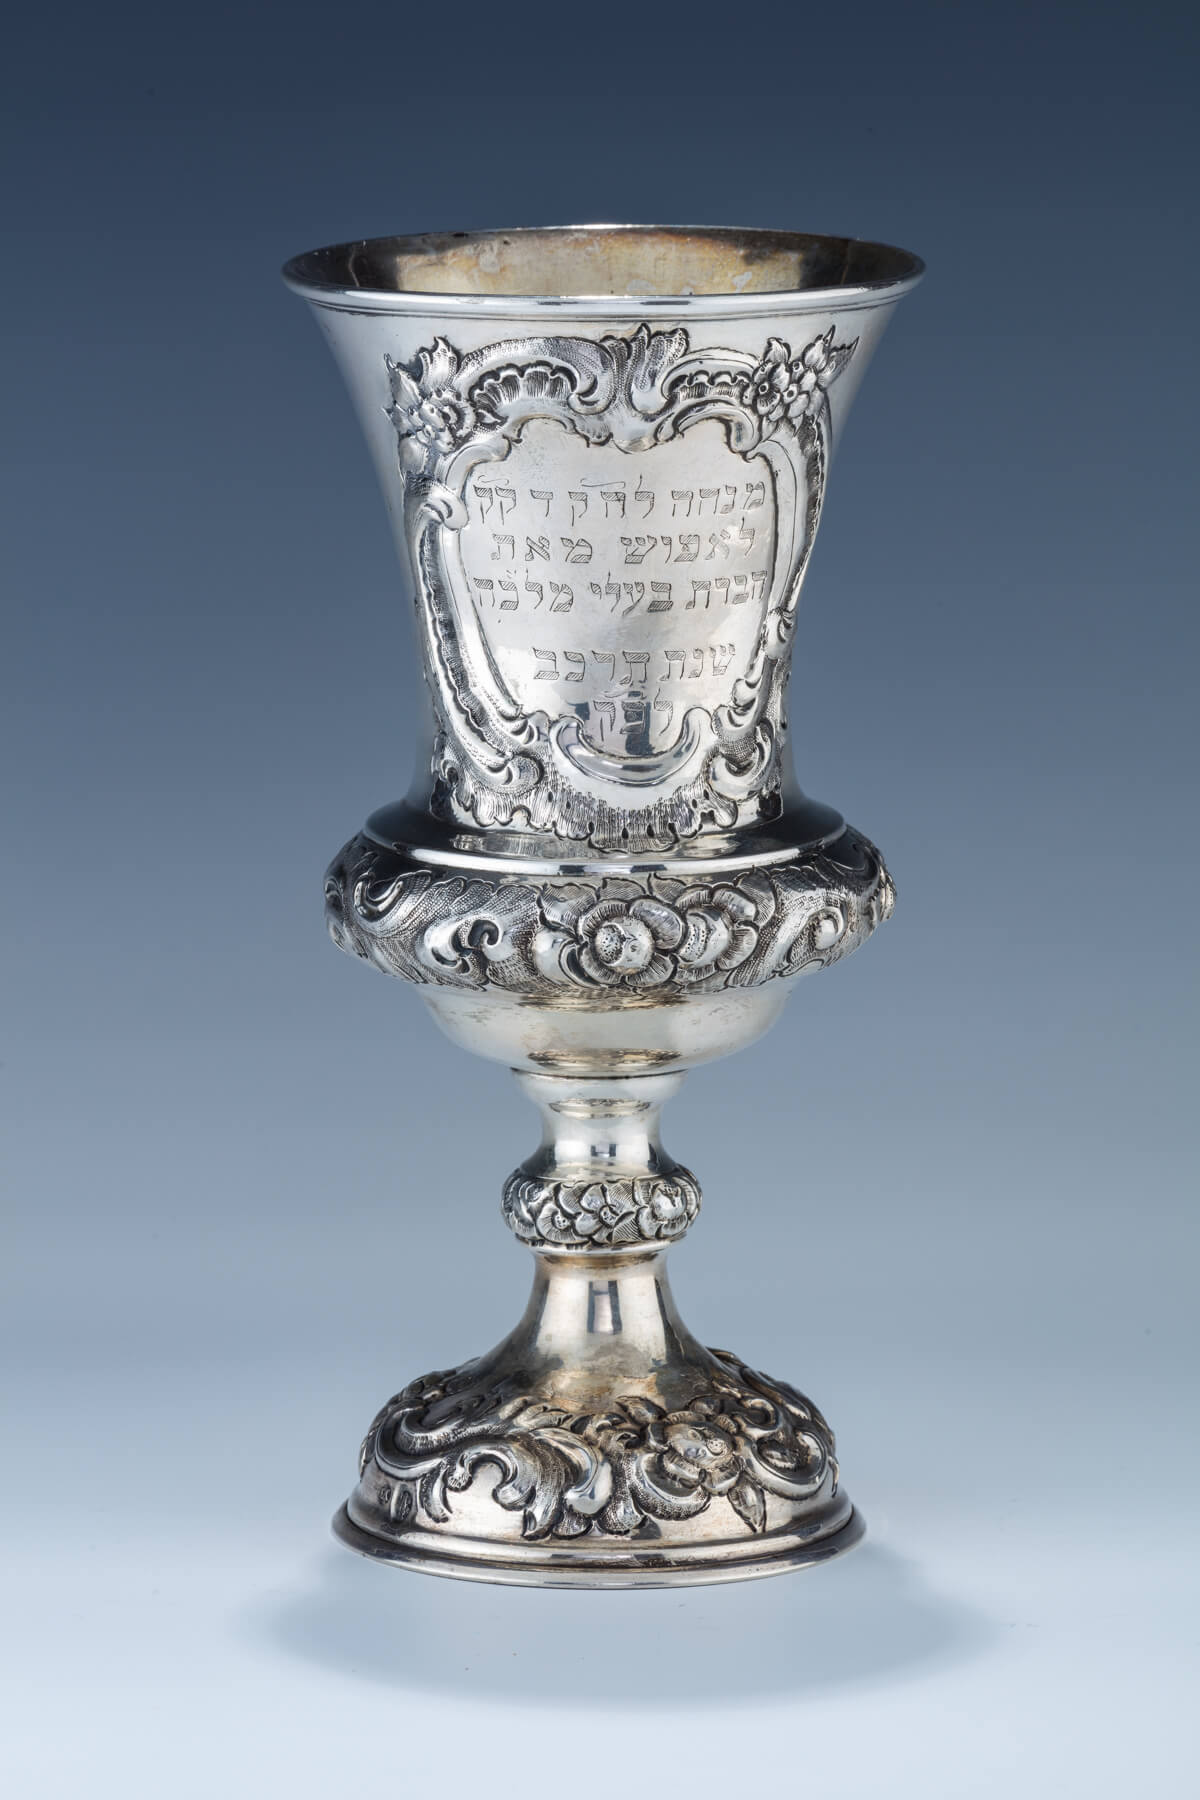 64. A Rare And Important Burial Society Goblet